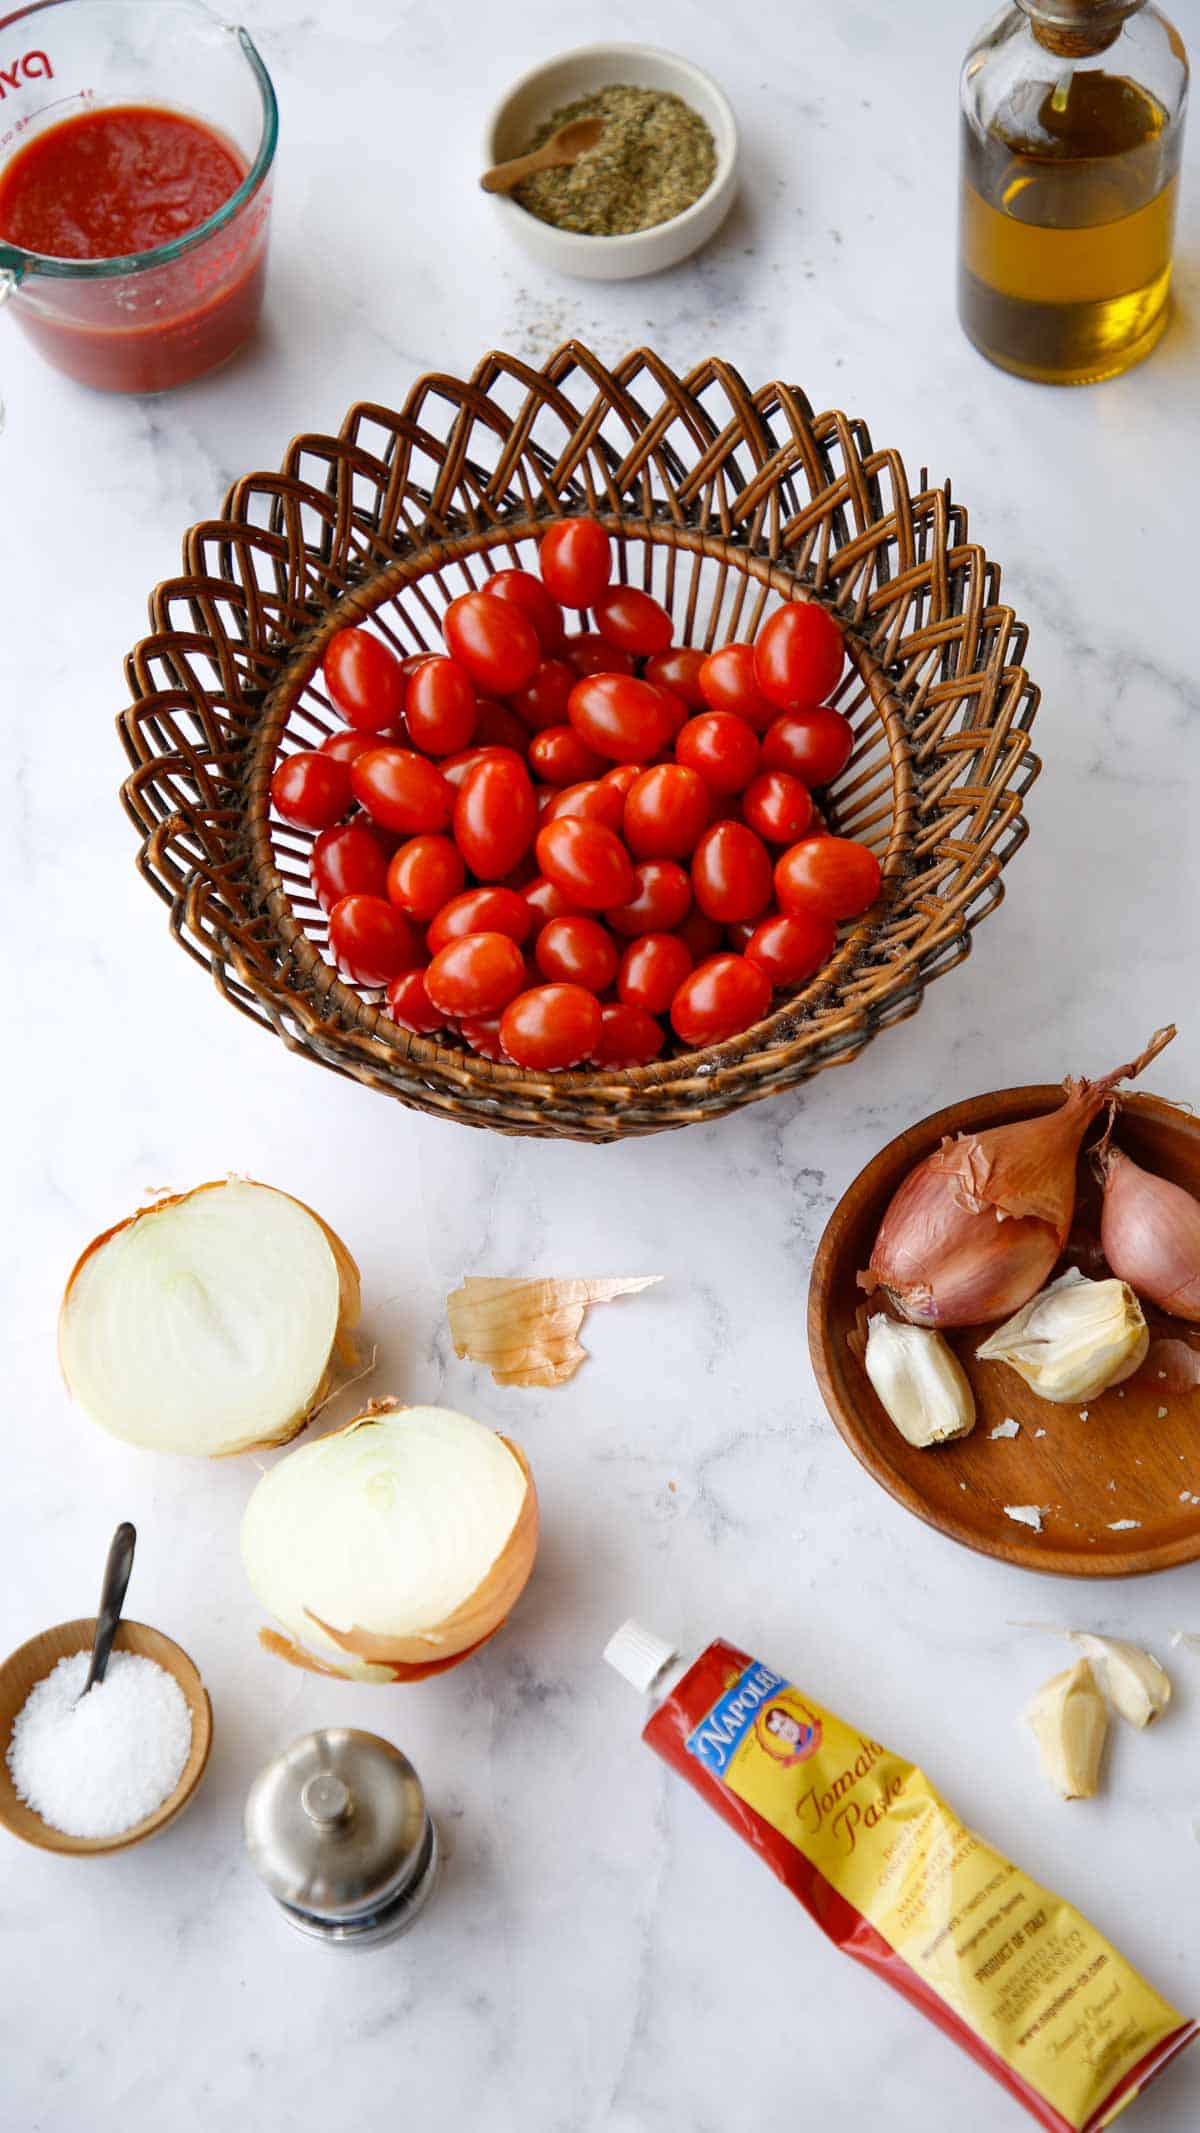 Ingredients for Easy Tomato Soup